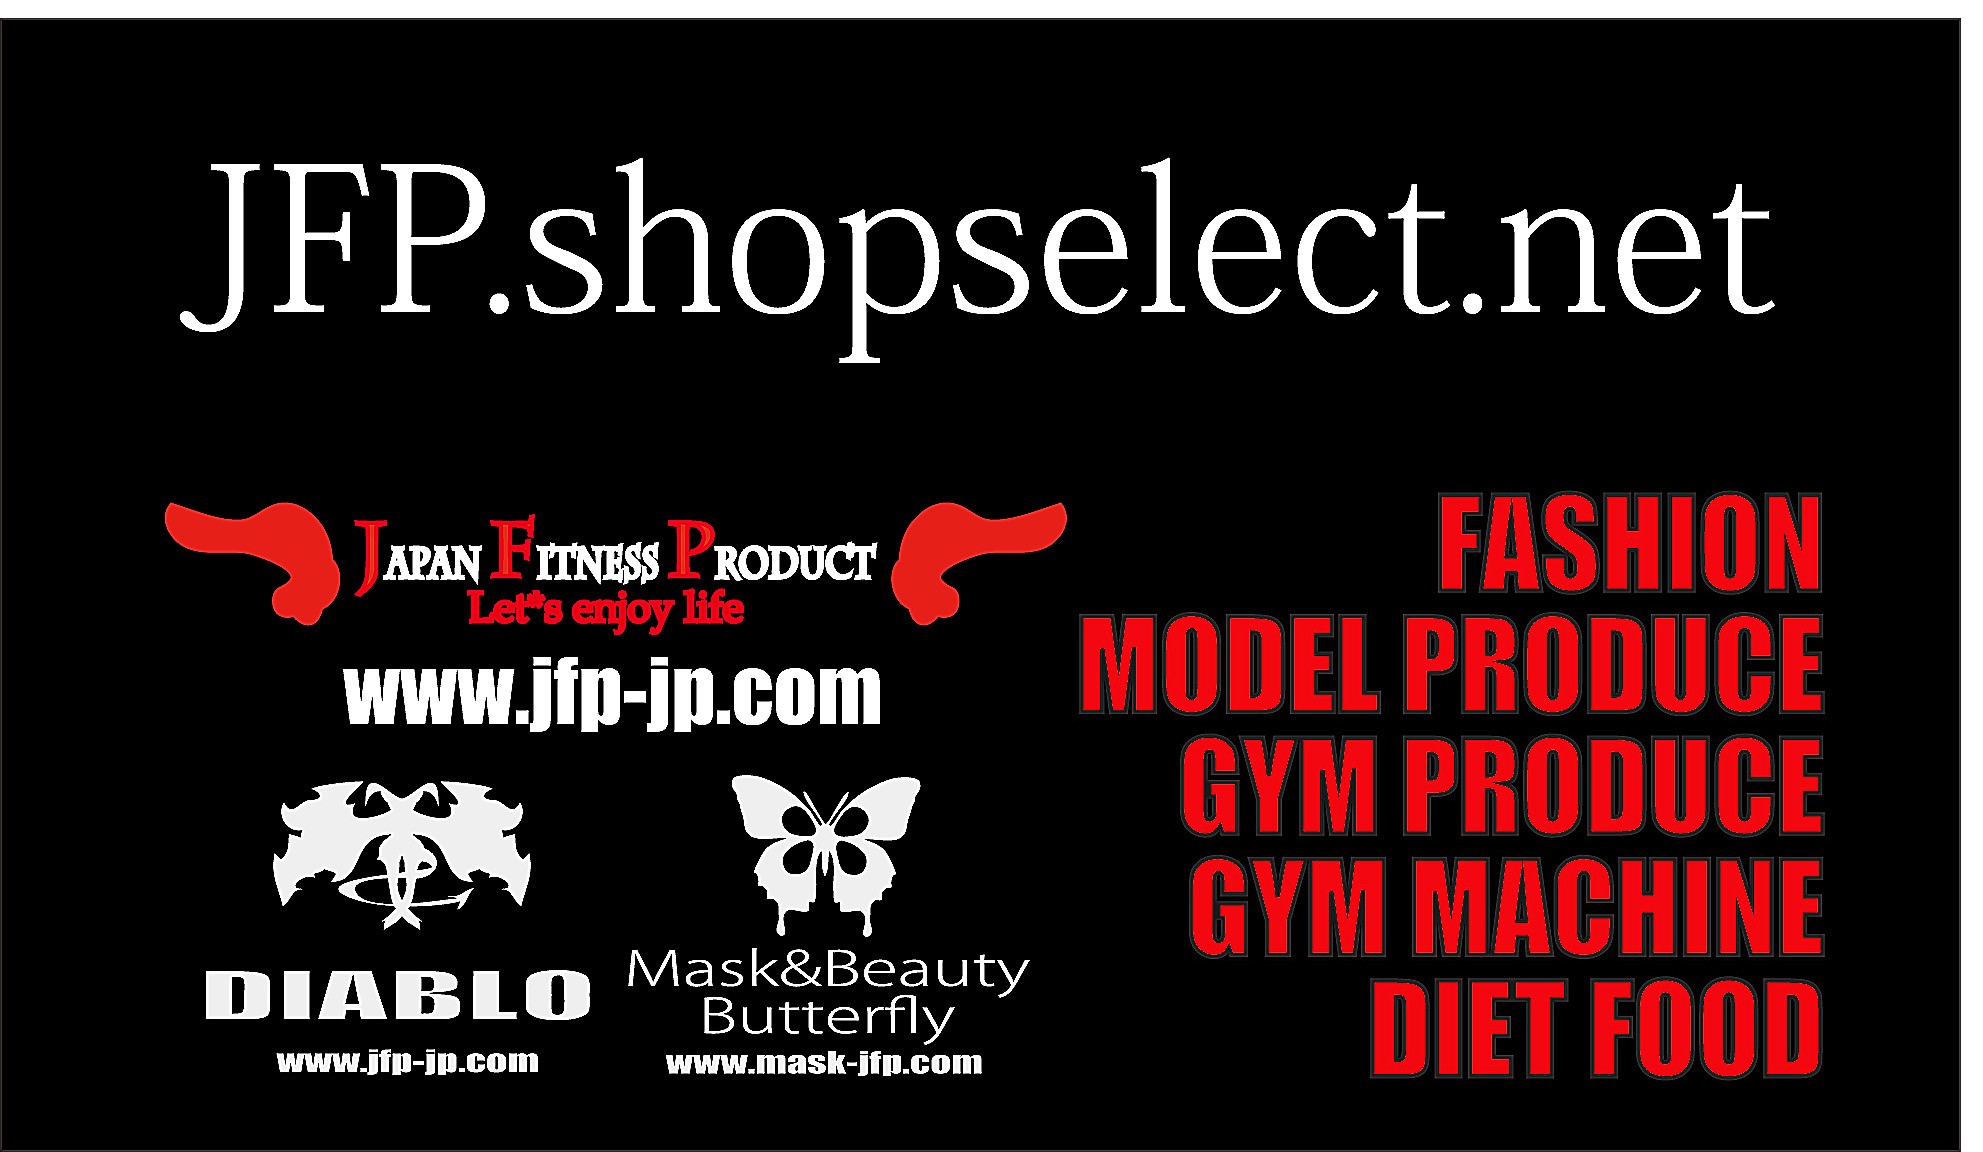 JAPAN FITNESS PRODUCT